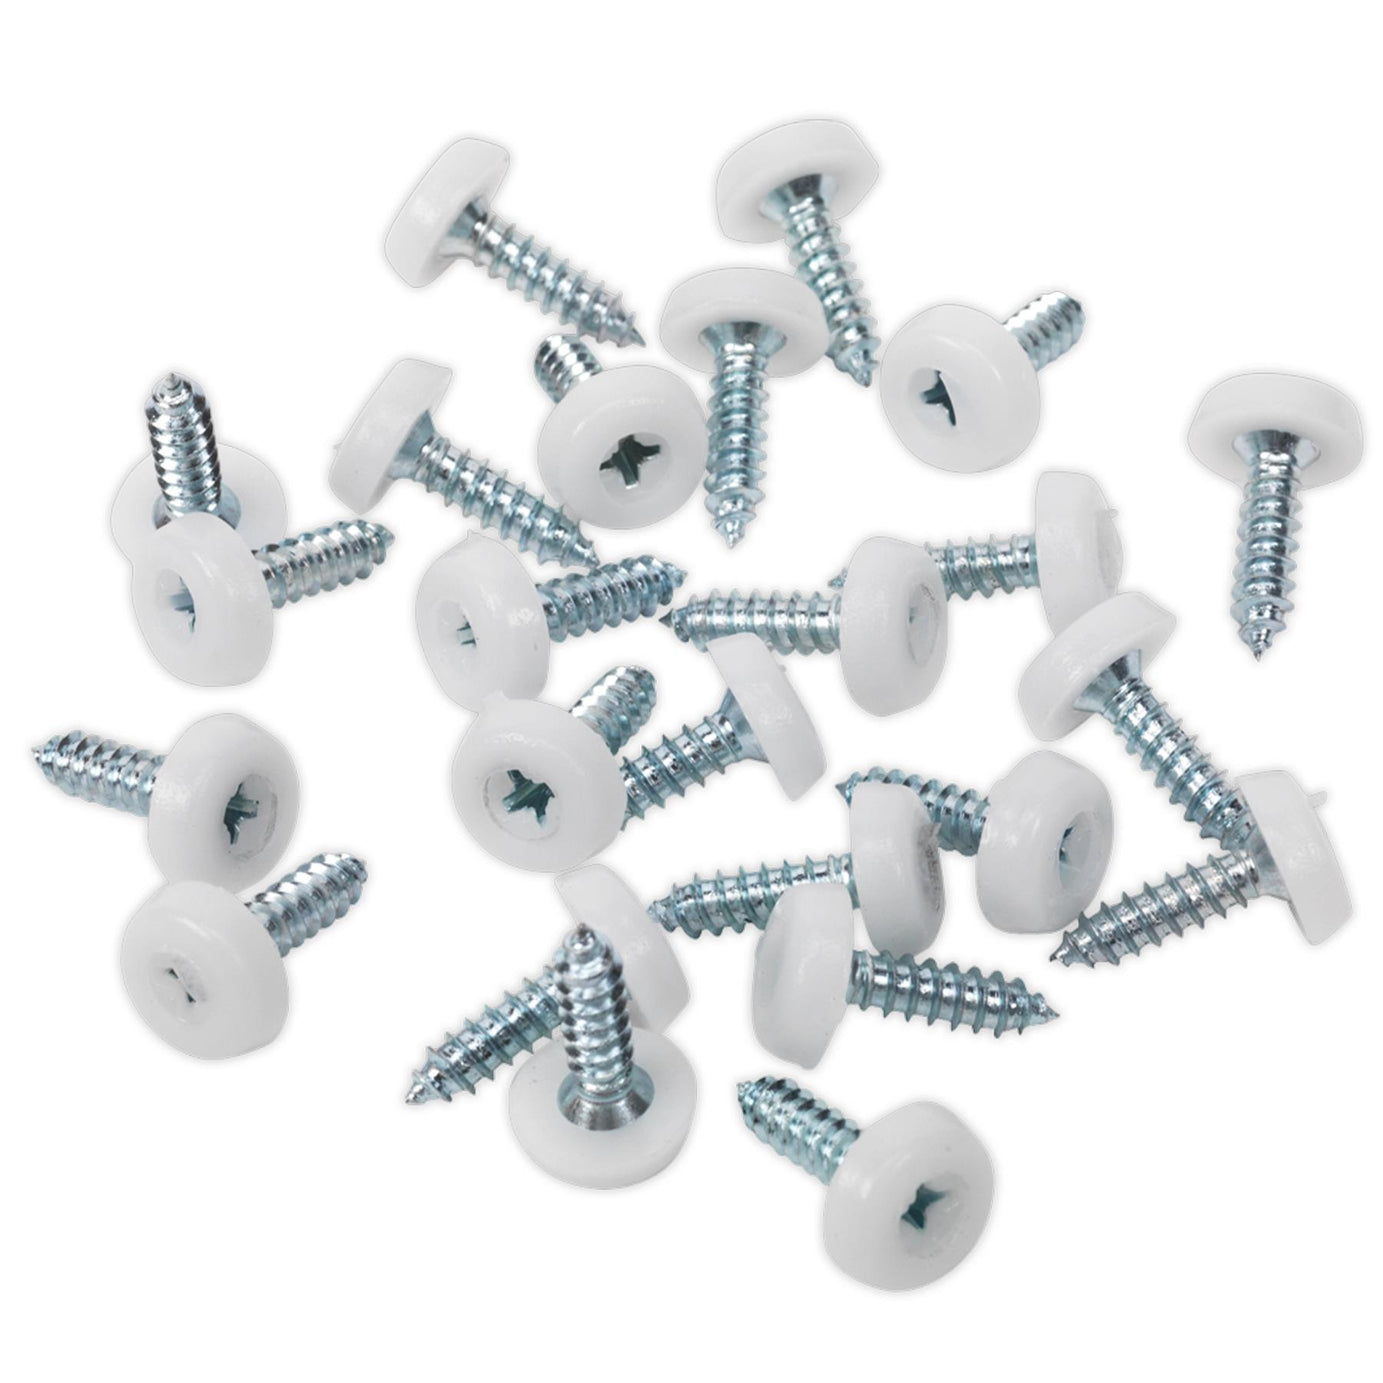 Sealey Numberplate Screw Plastic Head 4.8 x 18mm White Pack of 50